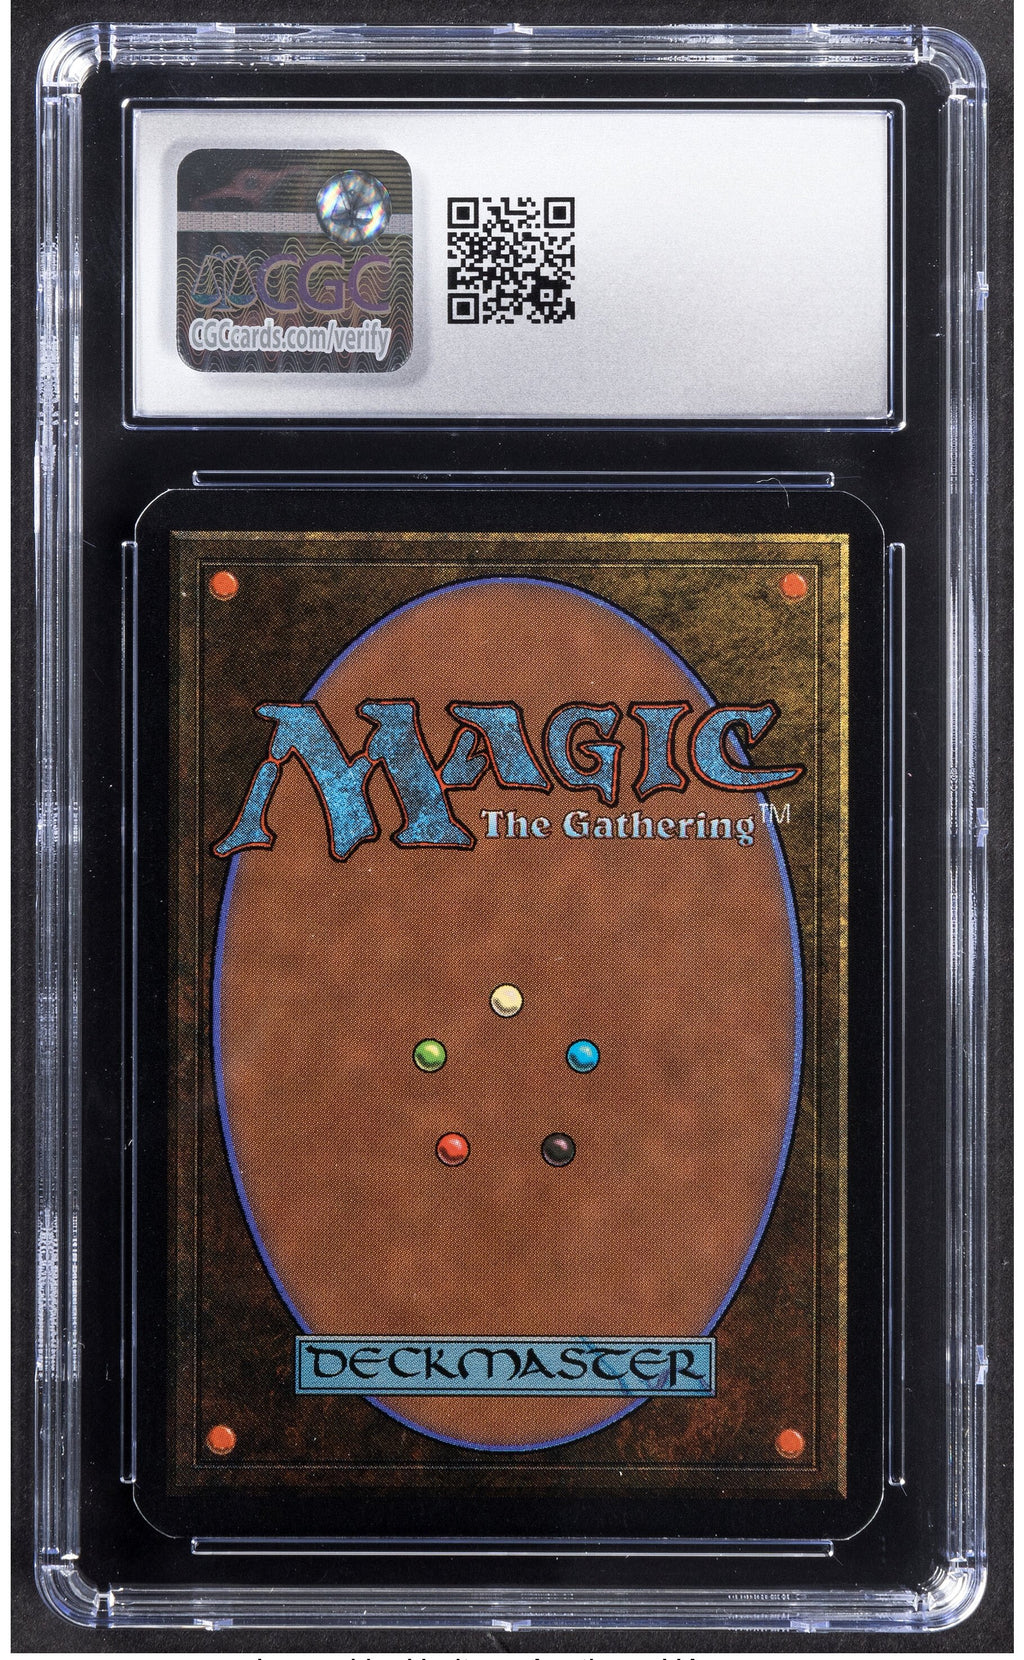 1993 Earthbind Magic: The Gathering Limited Edition (Alpha) Common CGC 10